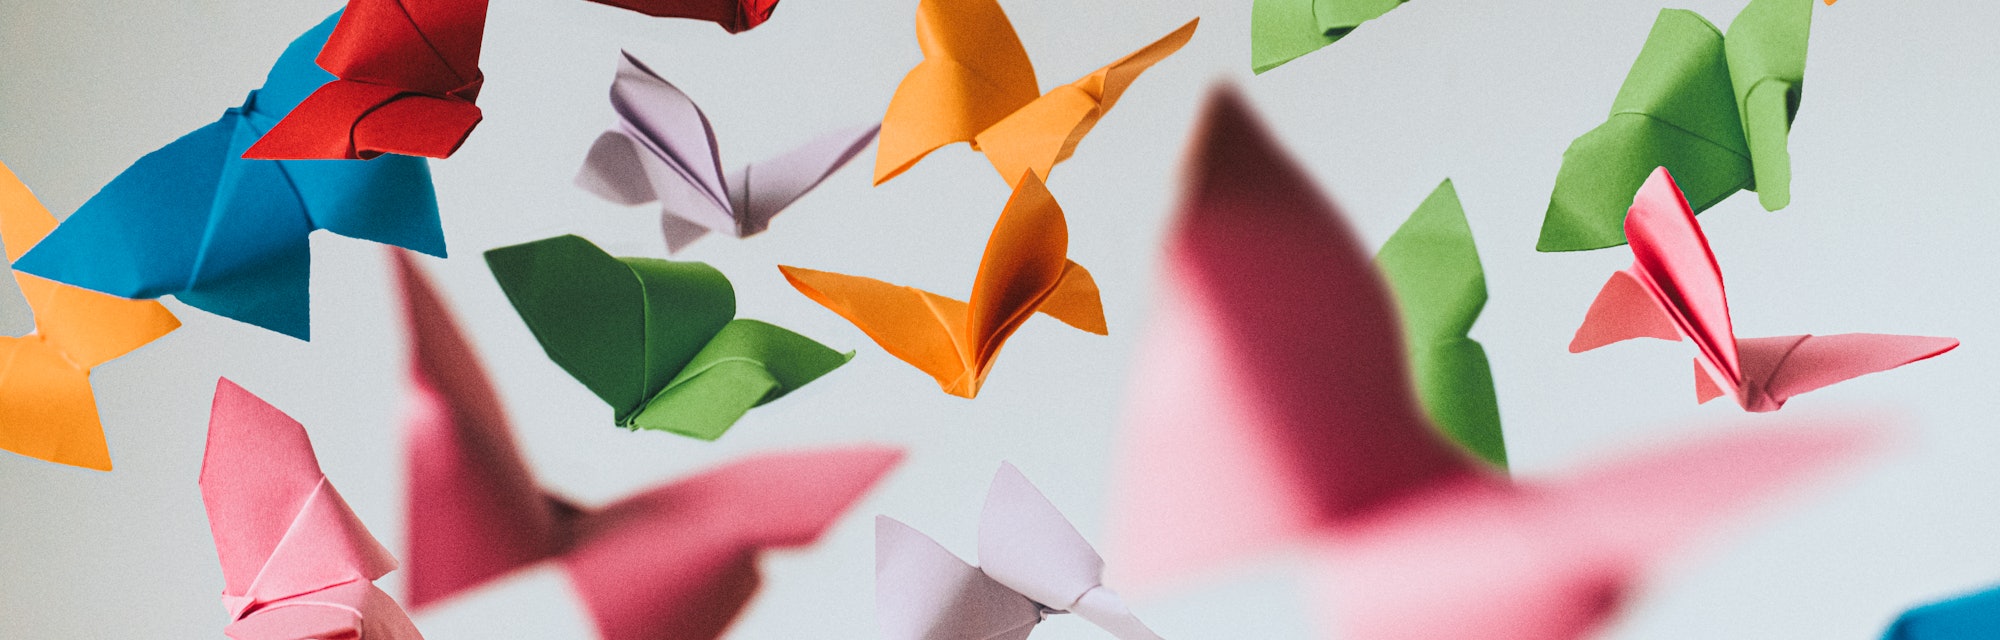 Falling coloured origami paper butterflies. Conceptual.